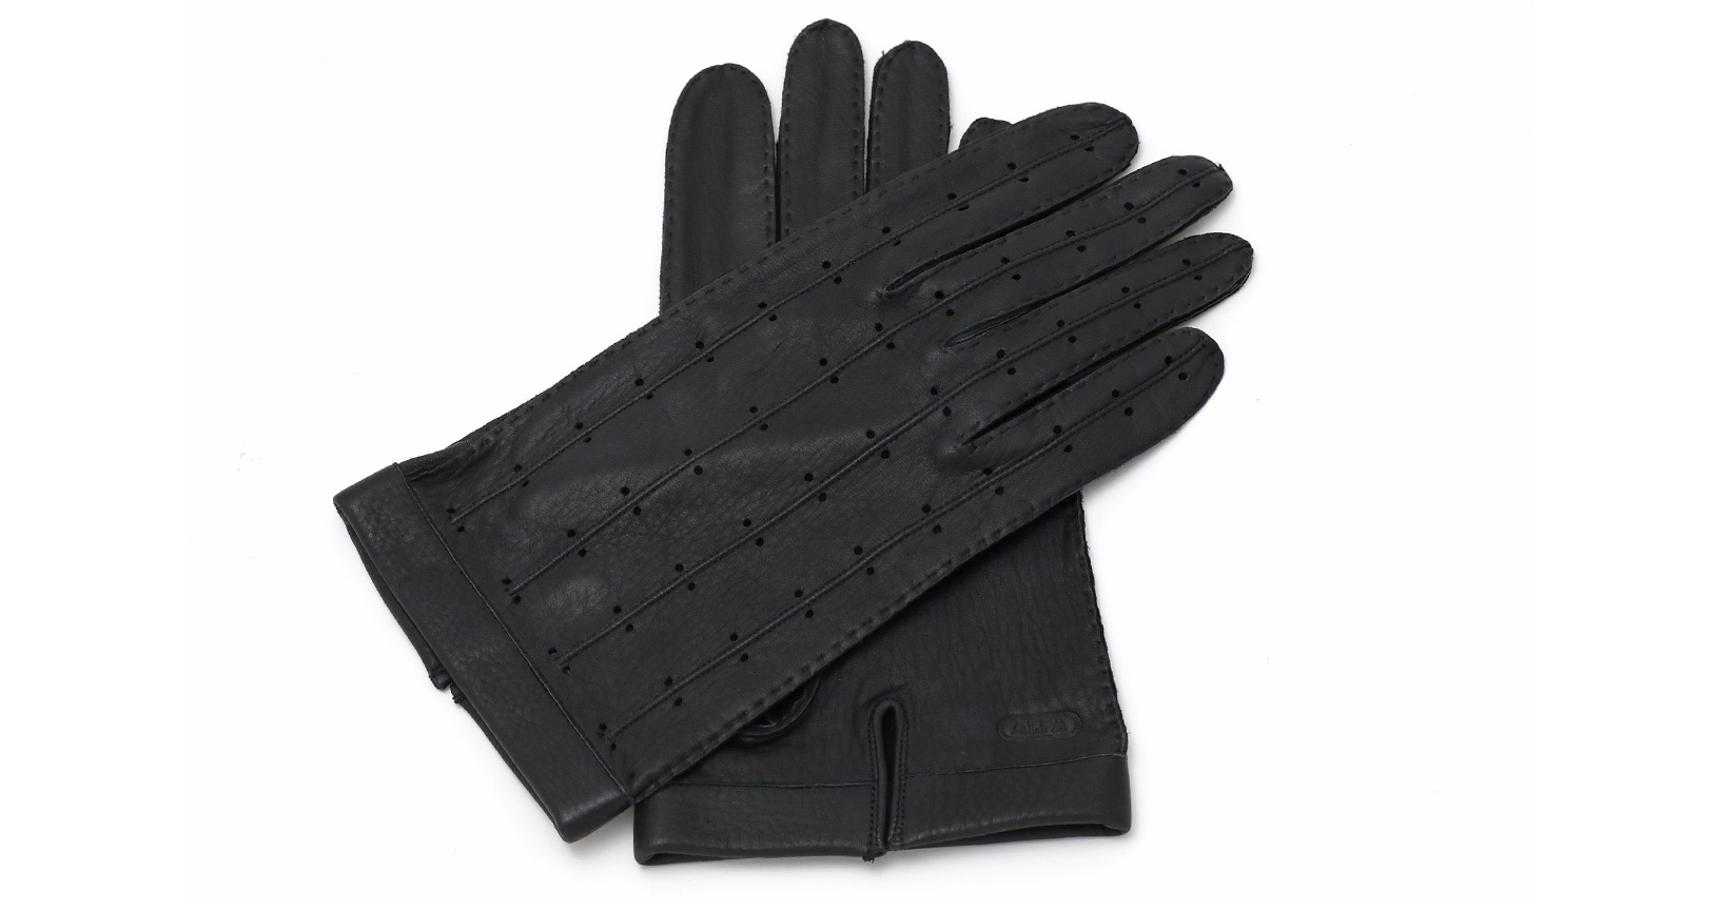 unlined gloves